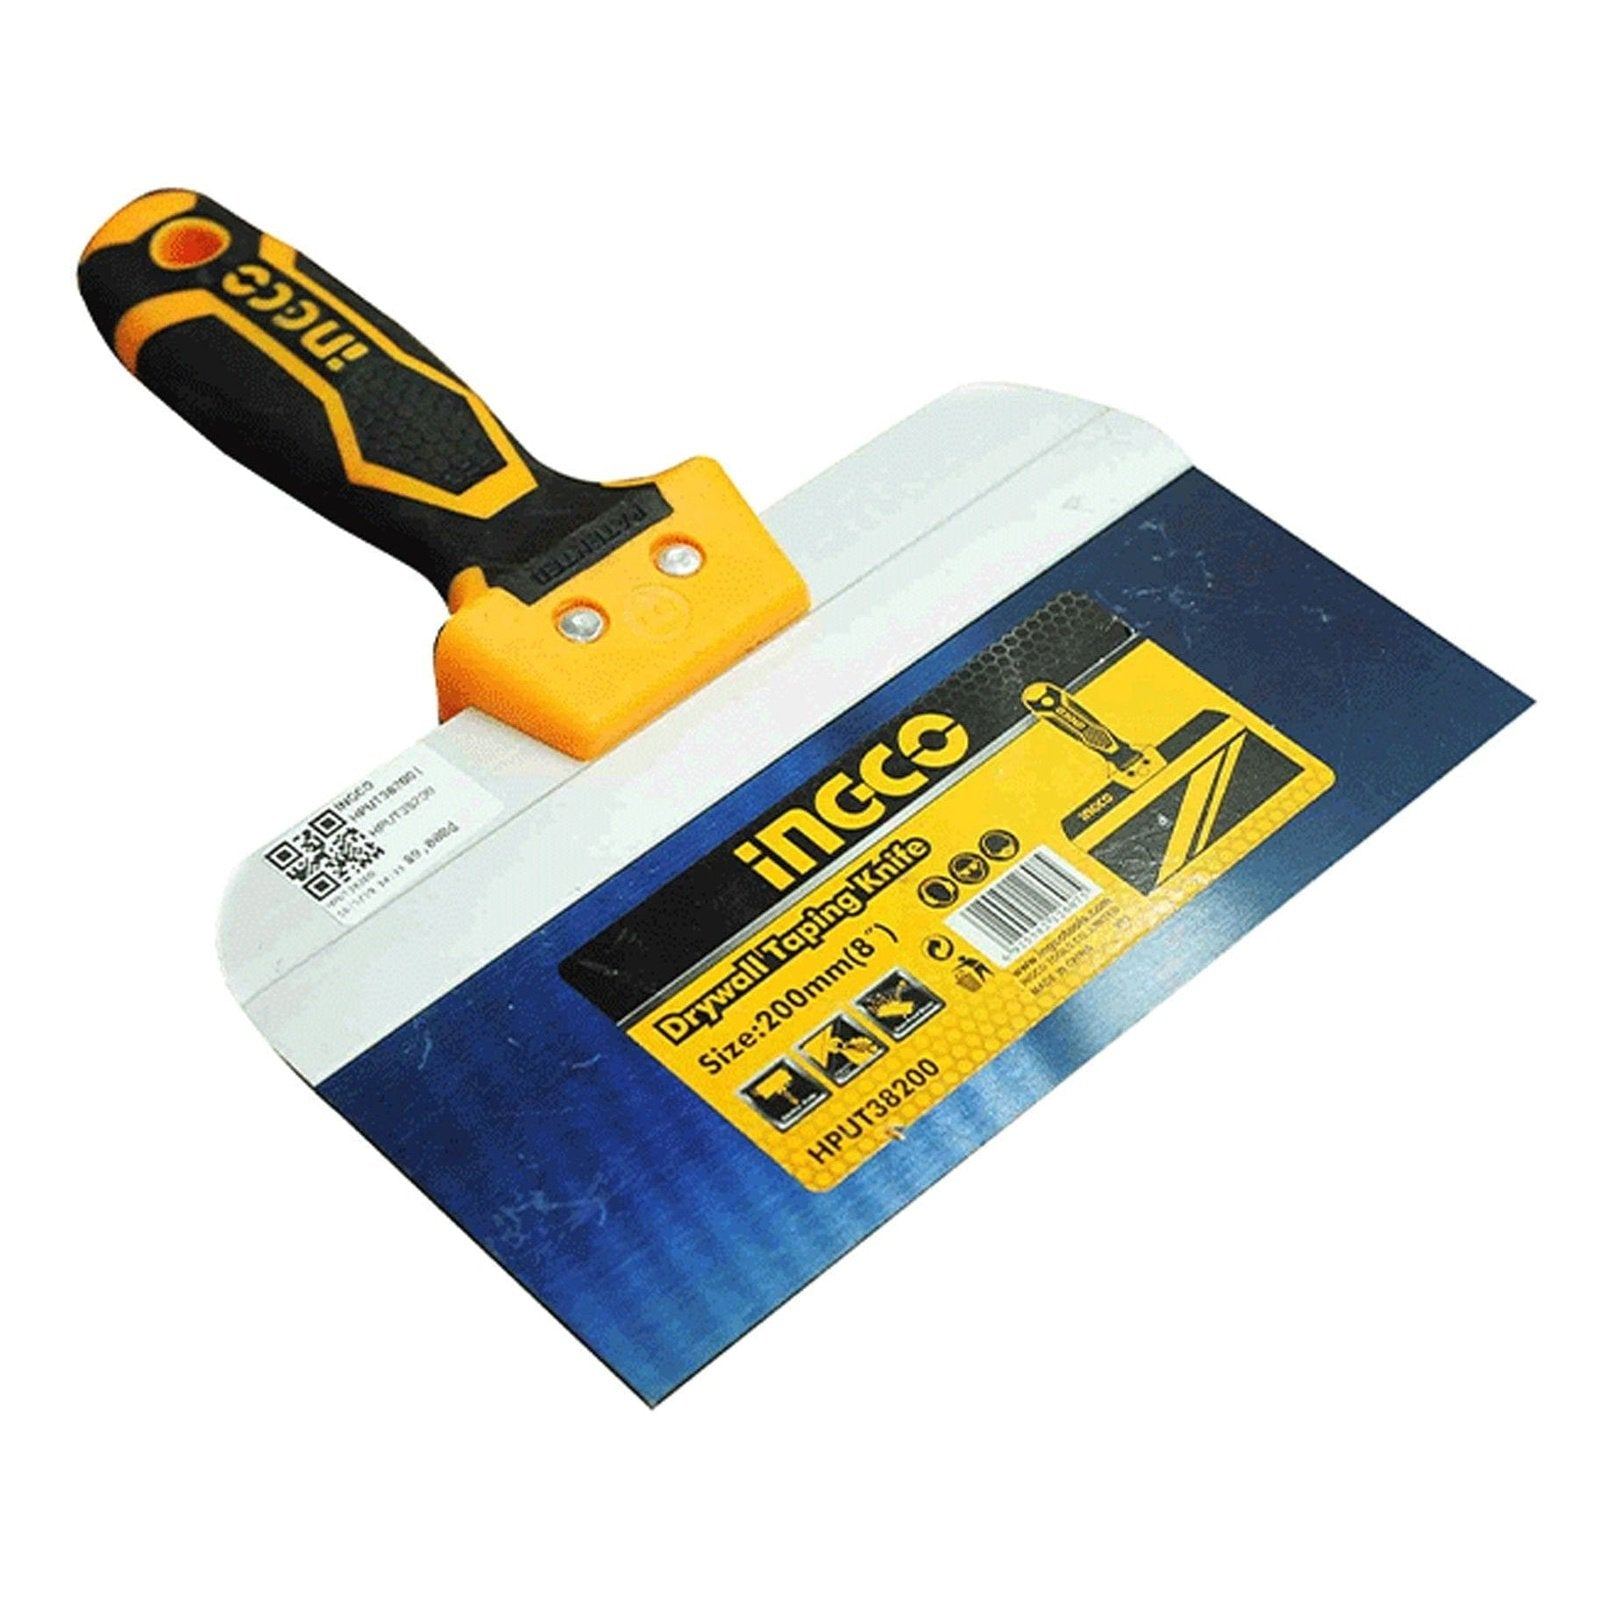 Ingco Drywall Taping Knife - HPUT20011 | Supply Master | Accra, Ghana Multi Tools & Knives Buy Tools hardware Building materials